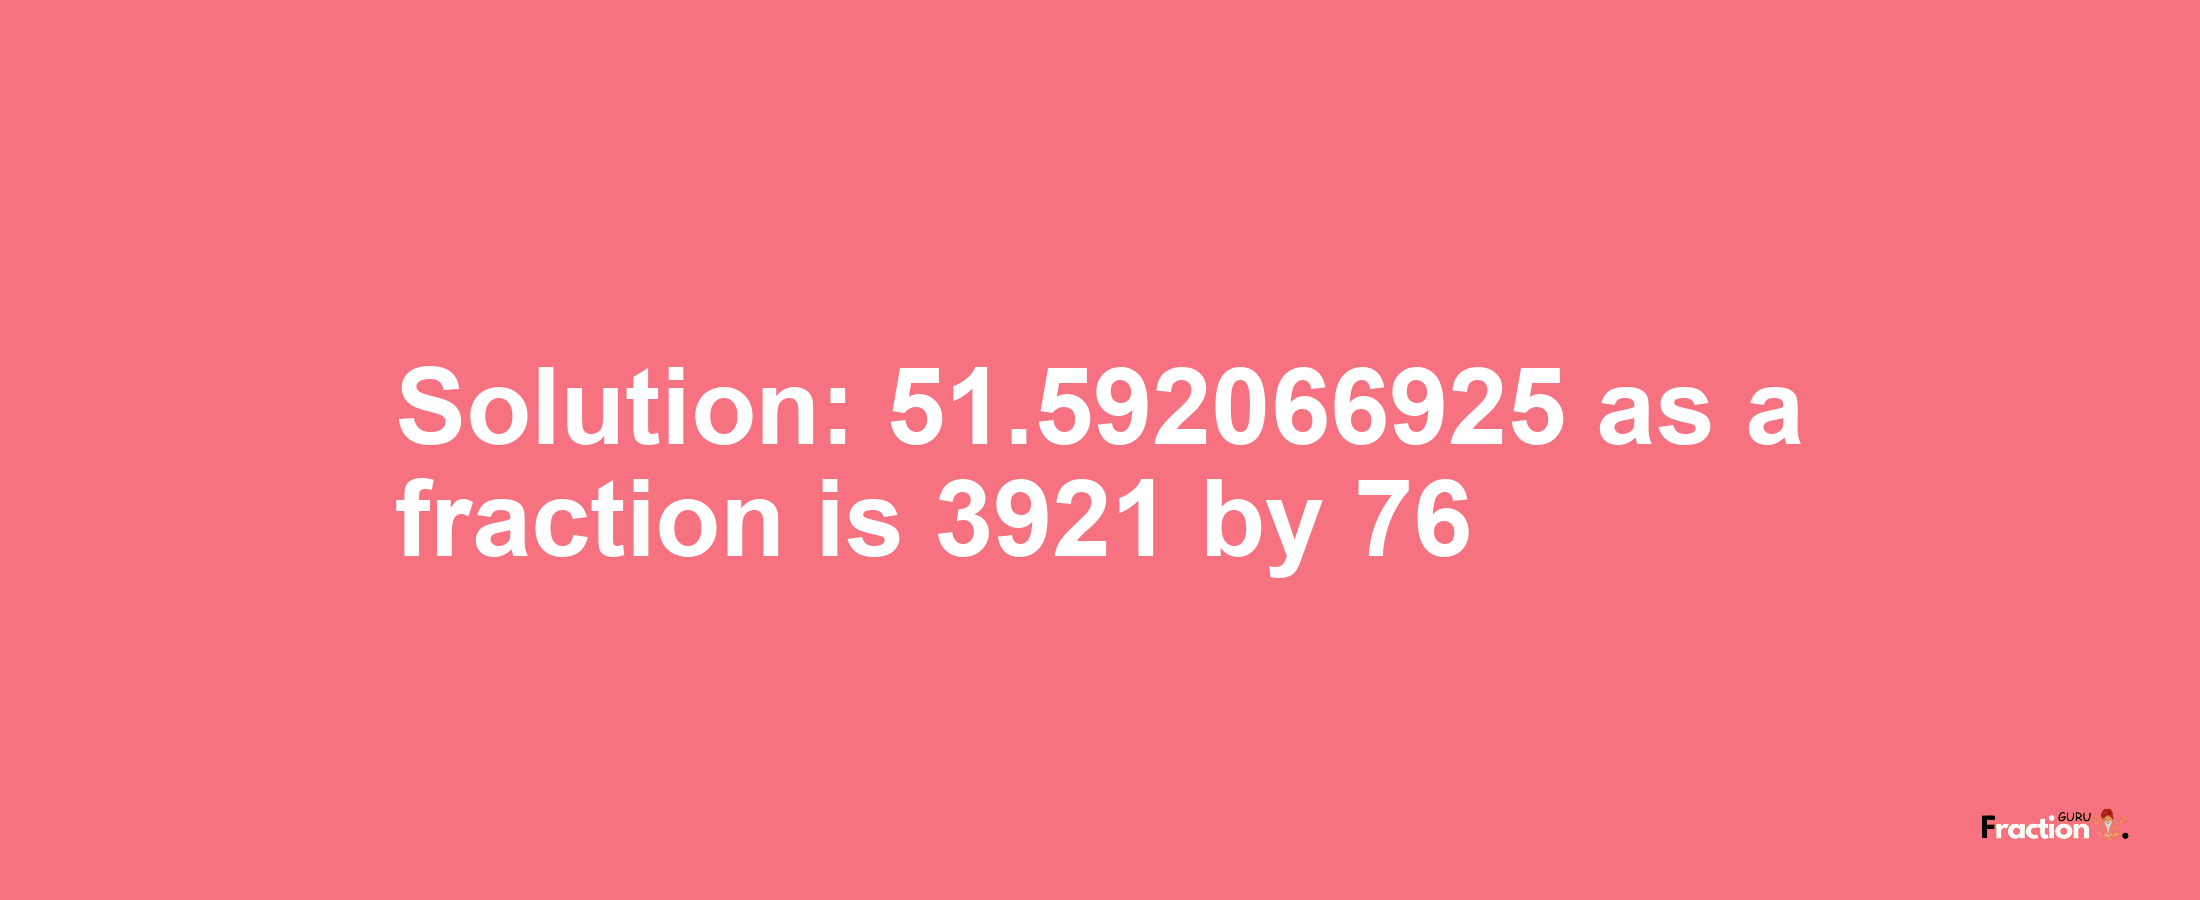 Solution:51.592066925 as a fraction is 3921/76